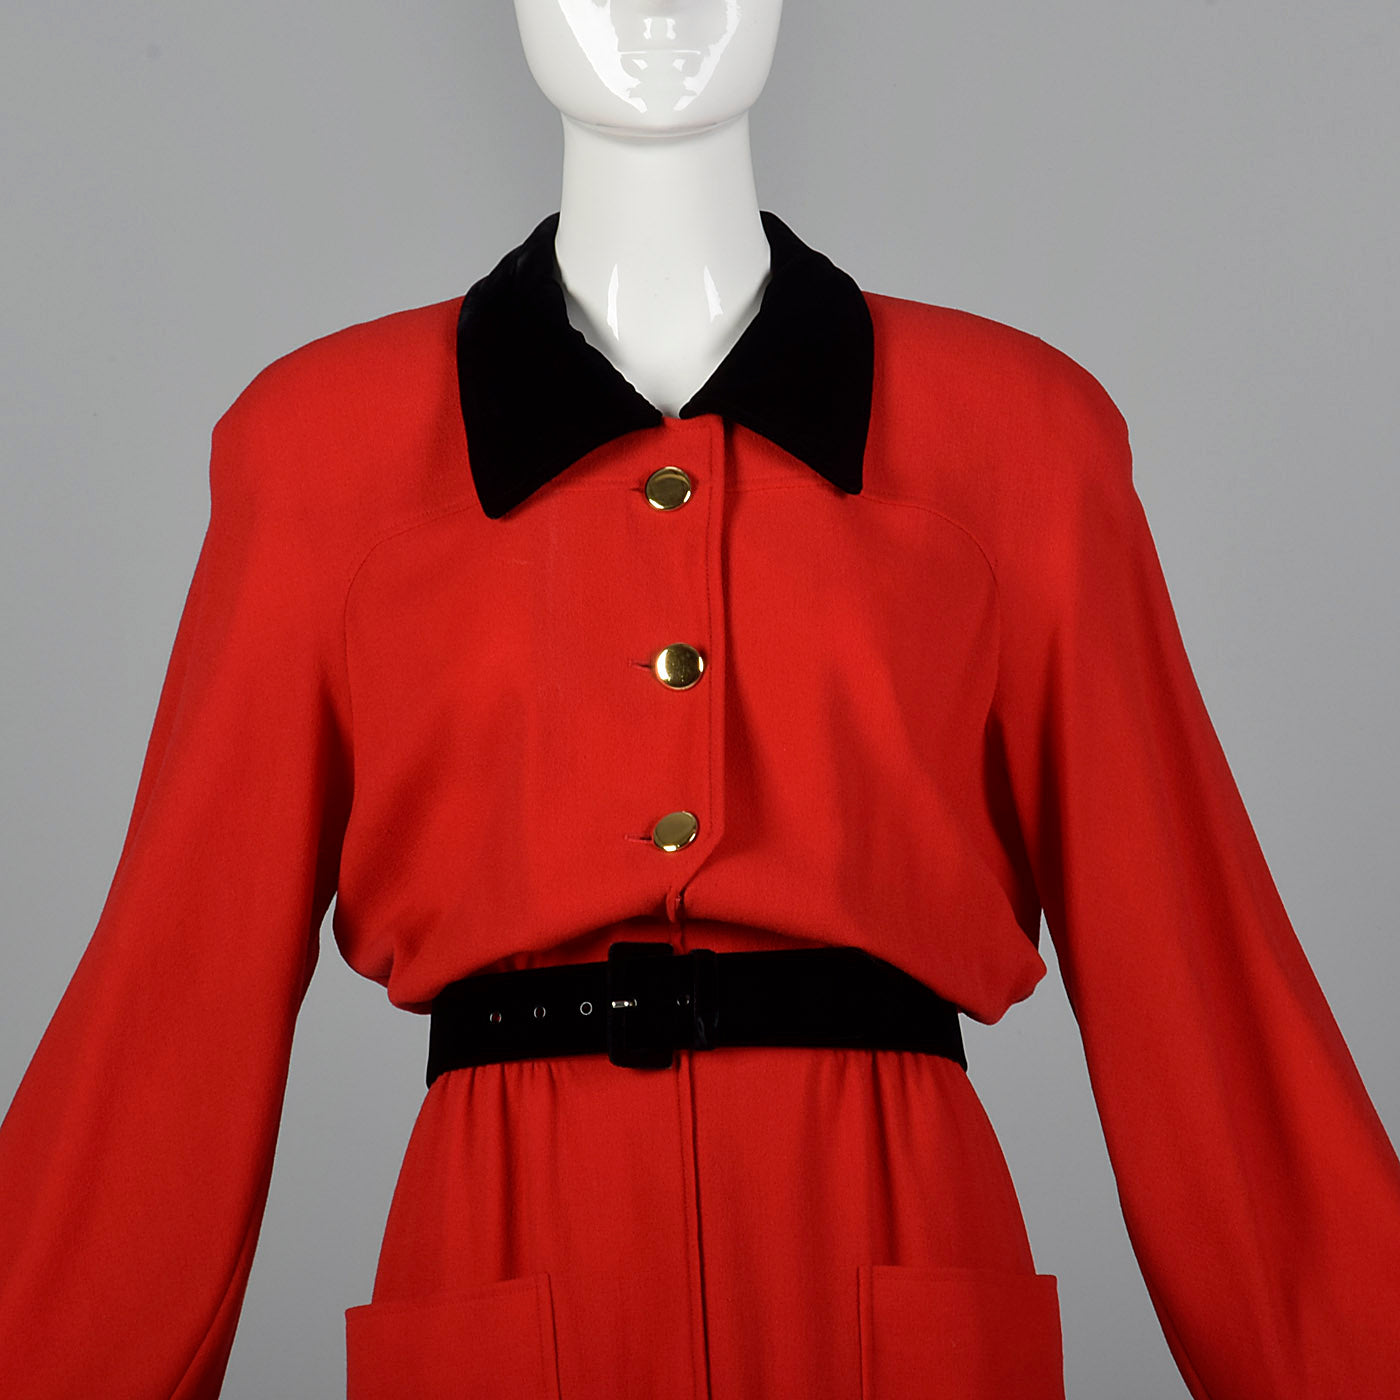 1980s Valentino Boutique Red Dress with Black Trim